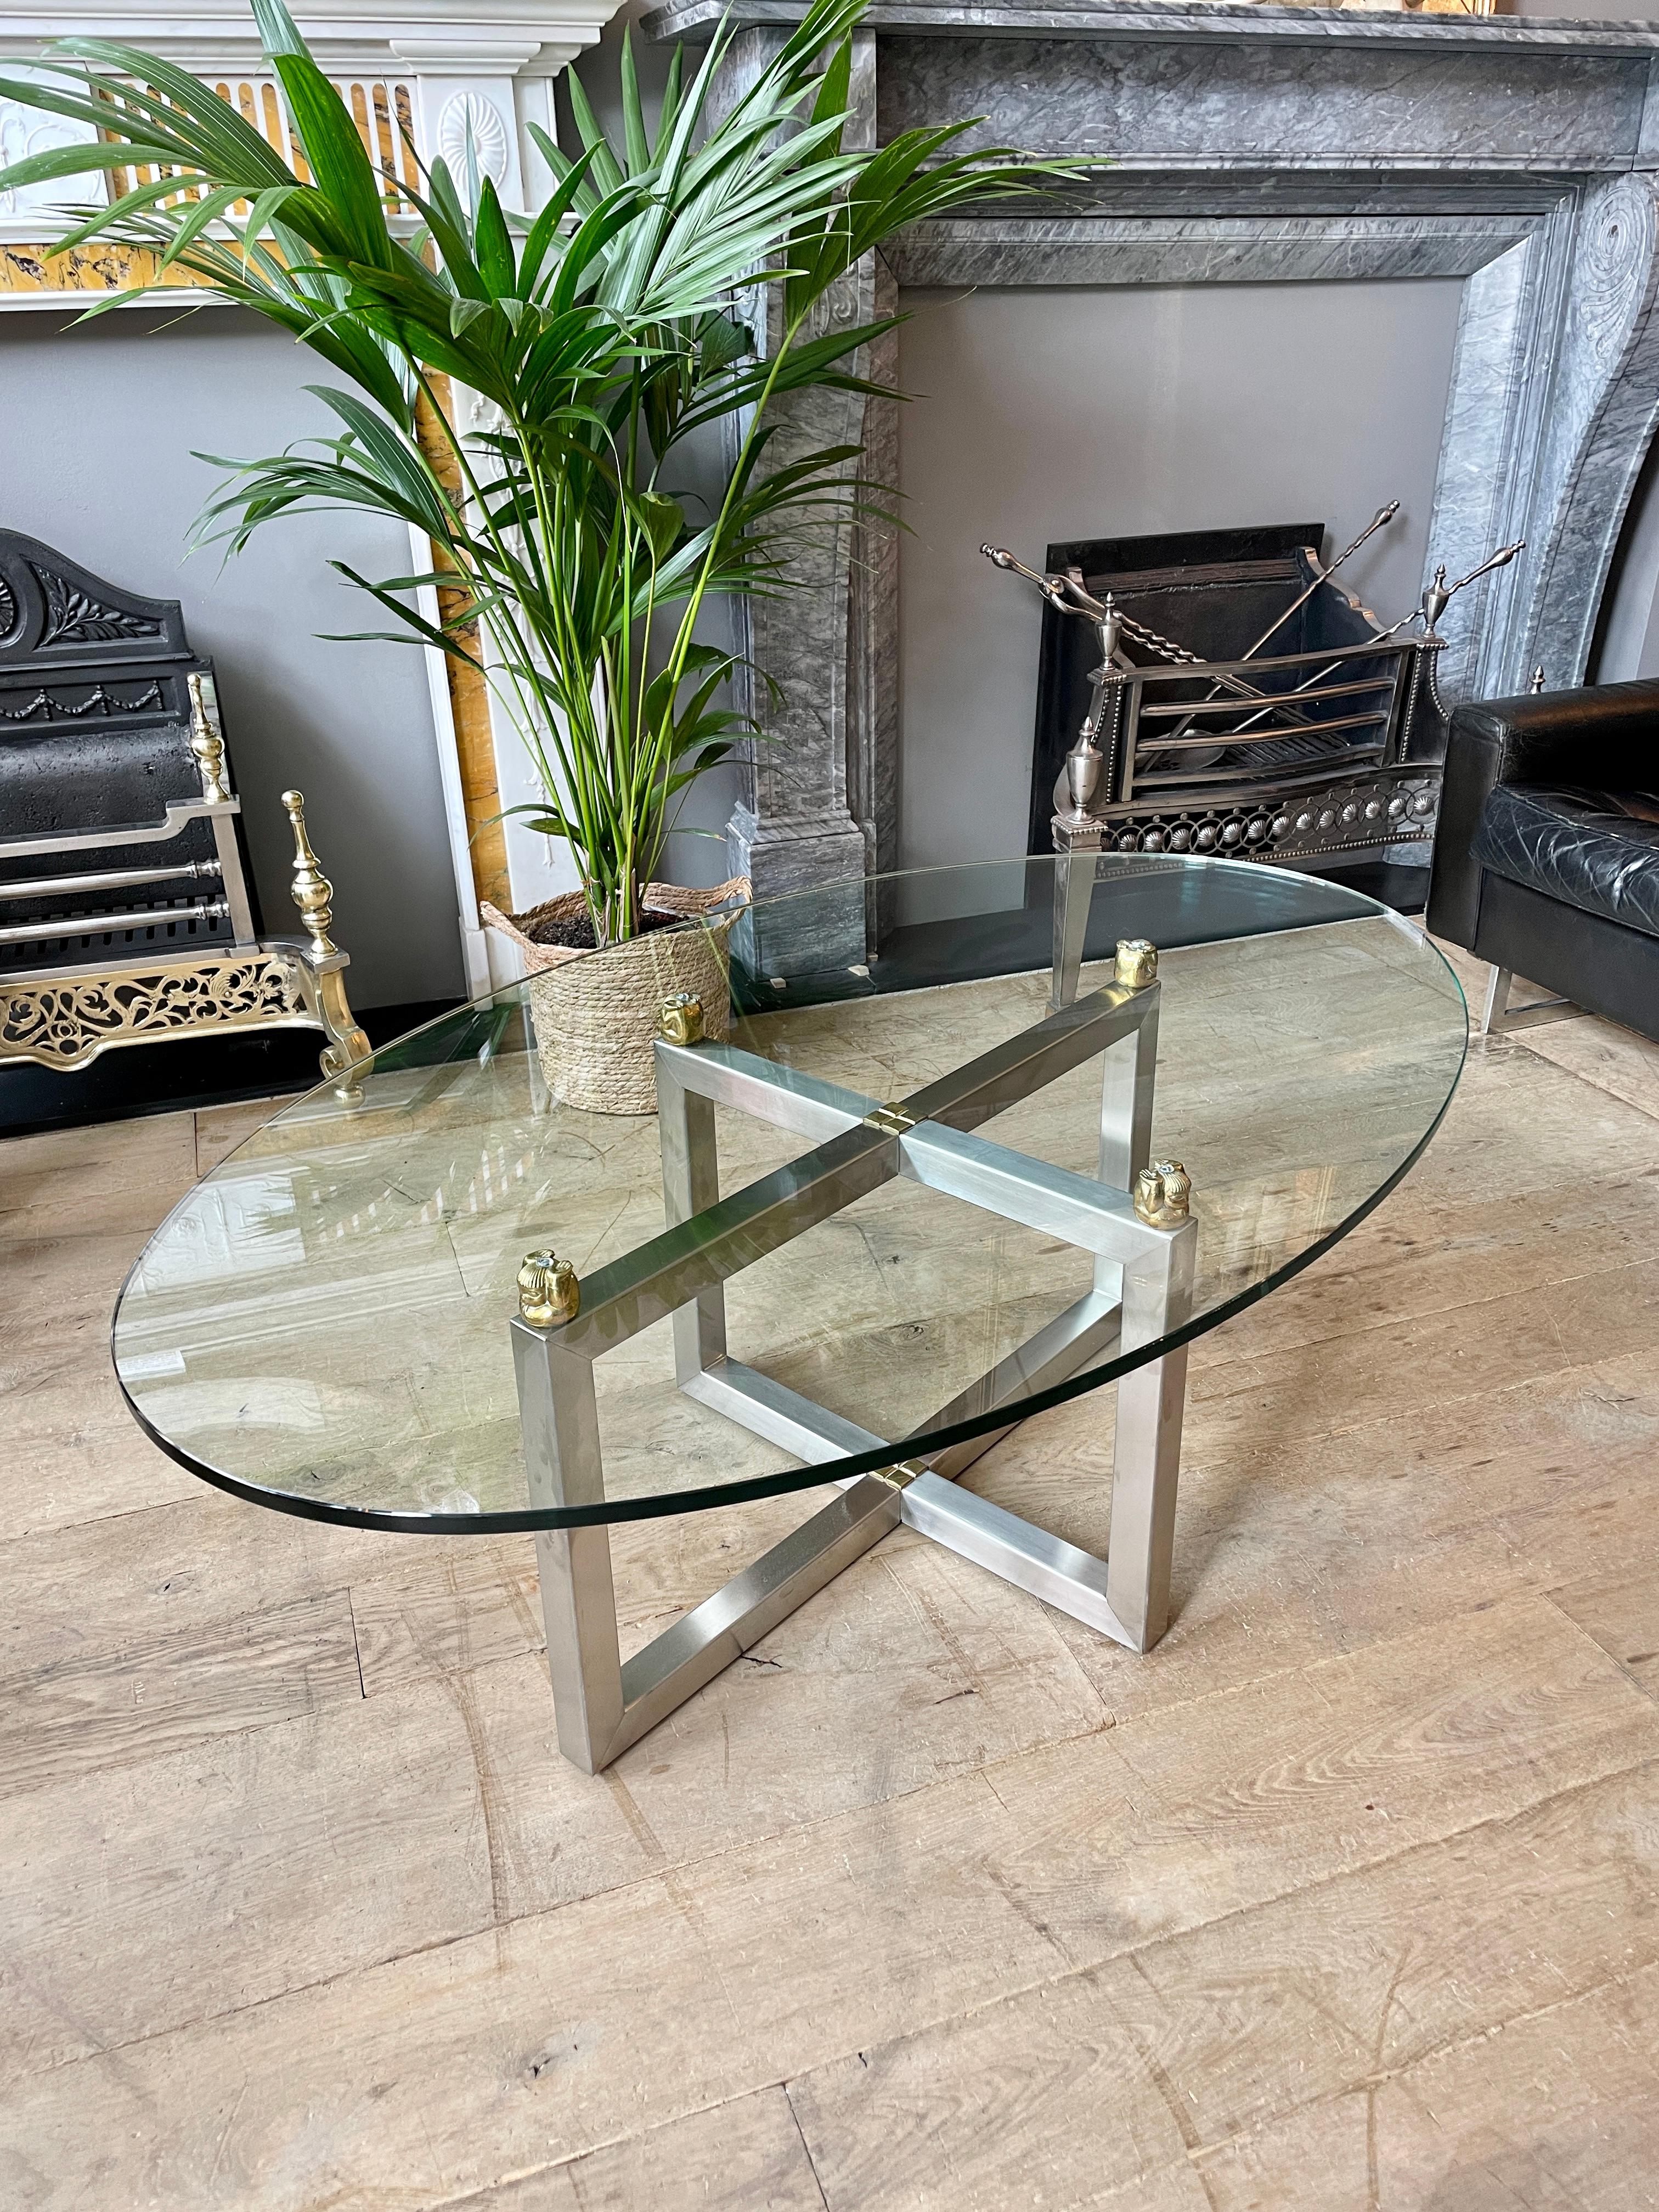 A Chrome table with thick oval glass top From the Biri range by Peter Ghyczy. A rare model with small heavy brass eastern figures supporting the glass top. A very good quality table by this designer.